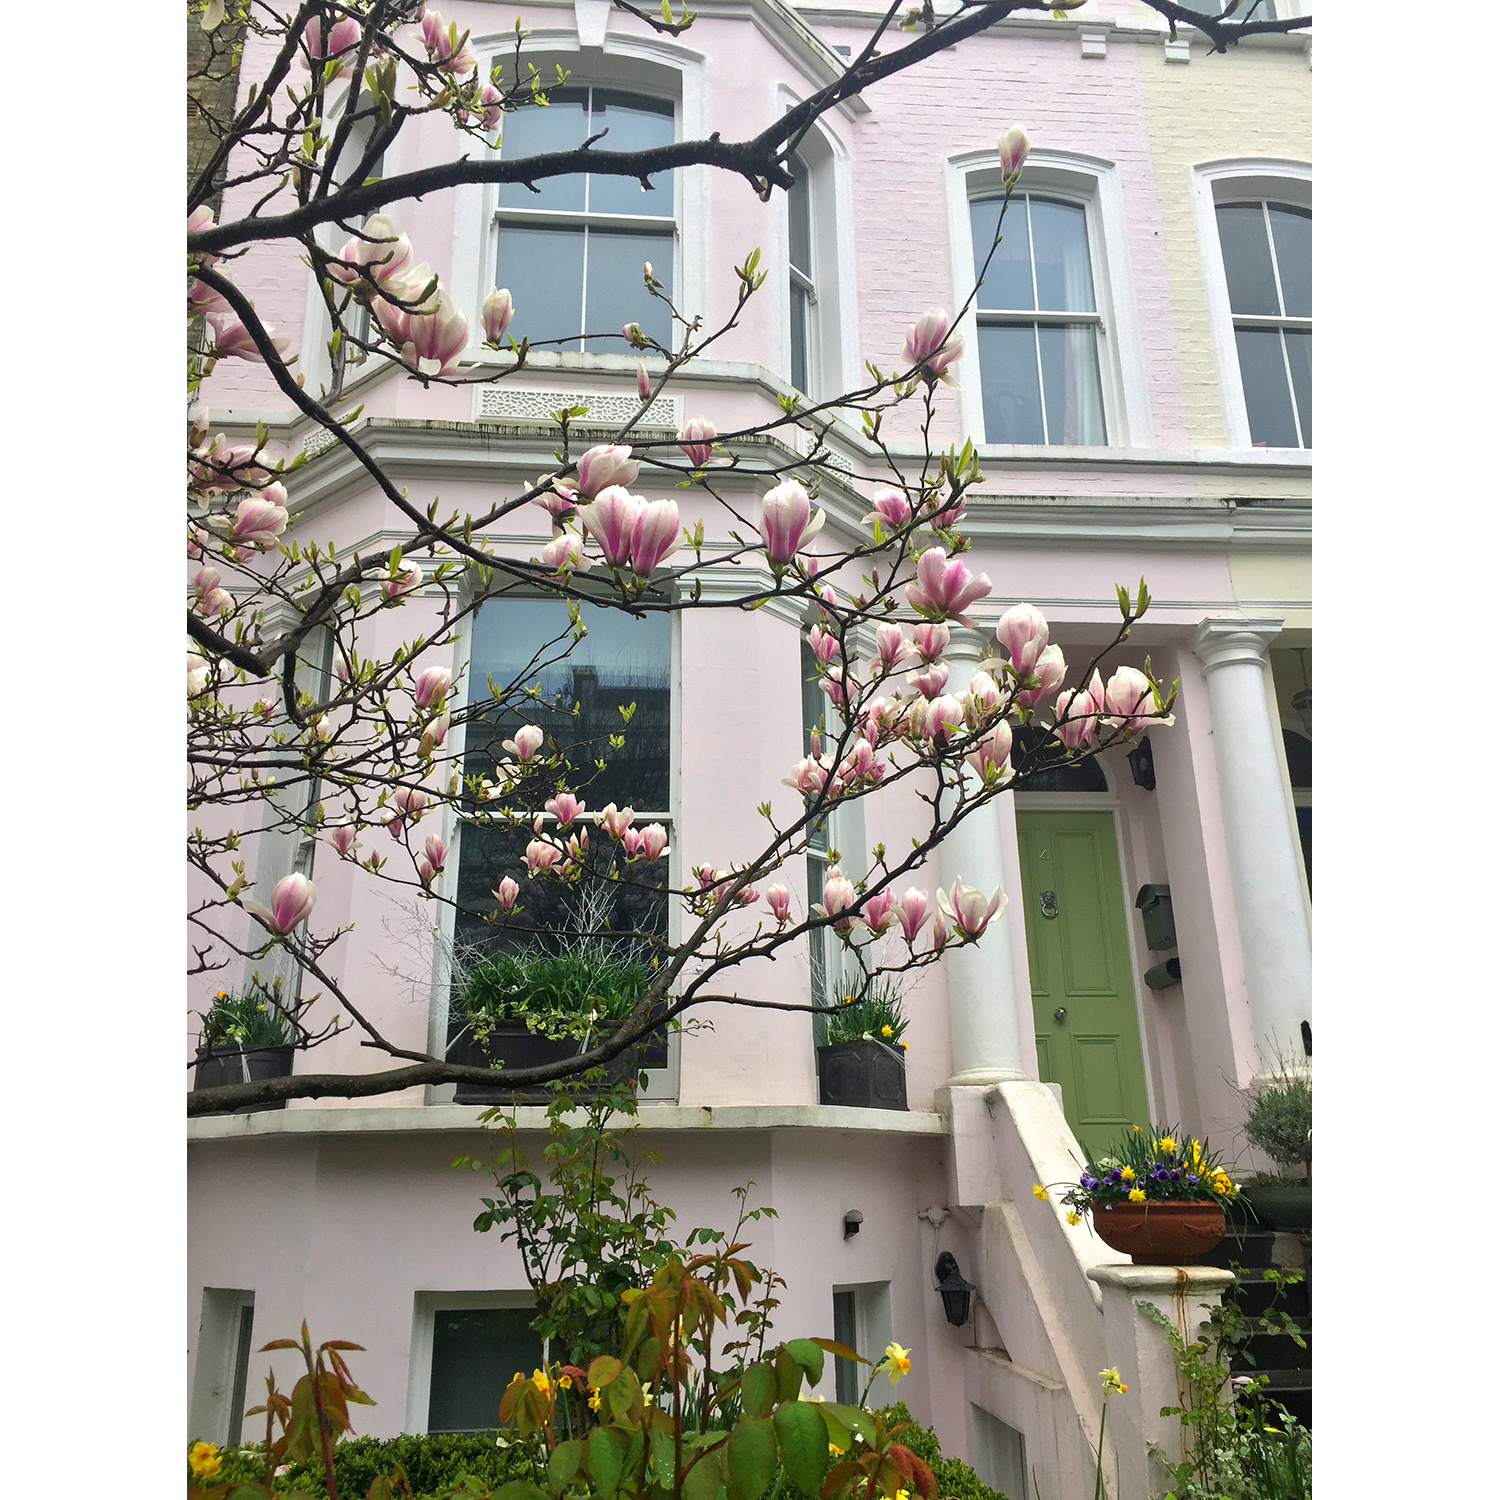 Spring transformations abound in Notting Hill 💕🌸💚🌿